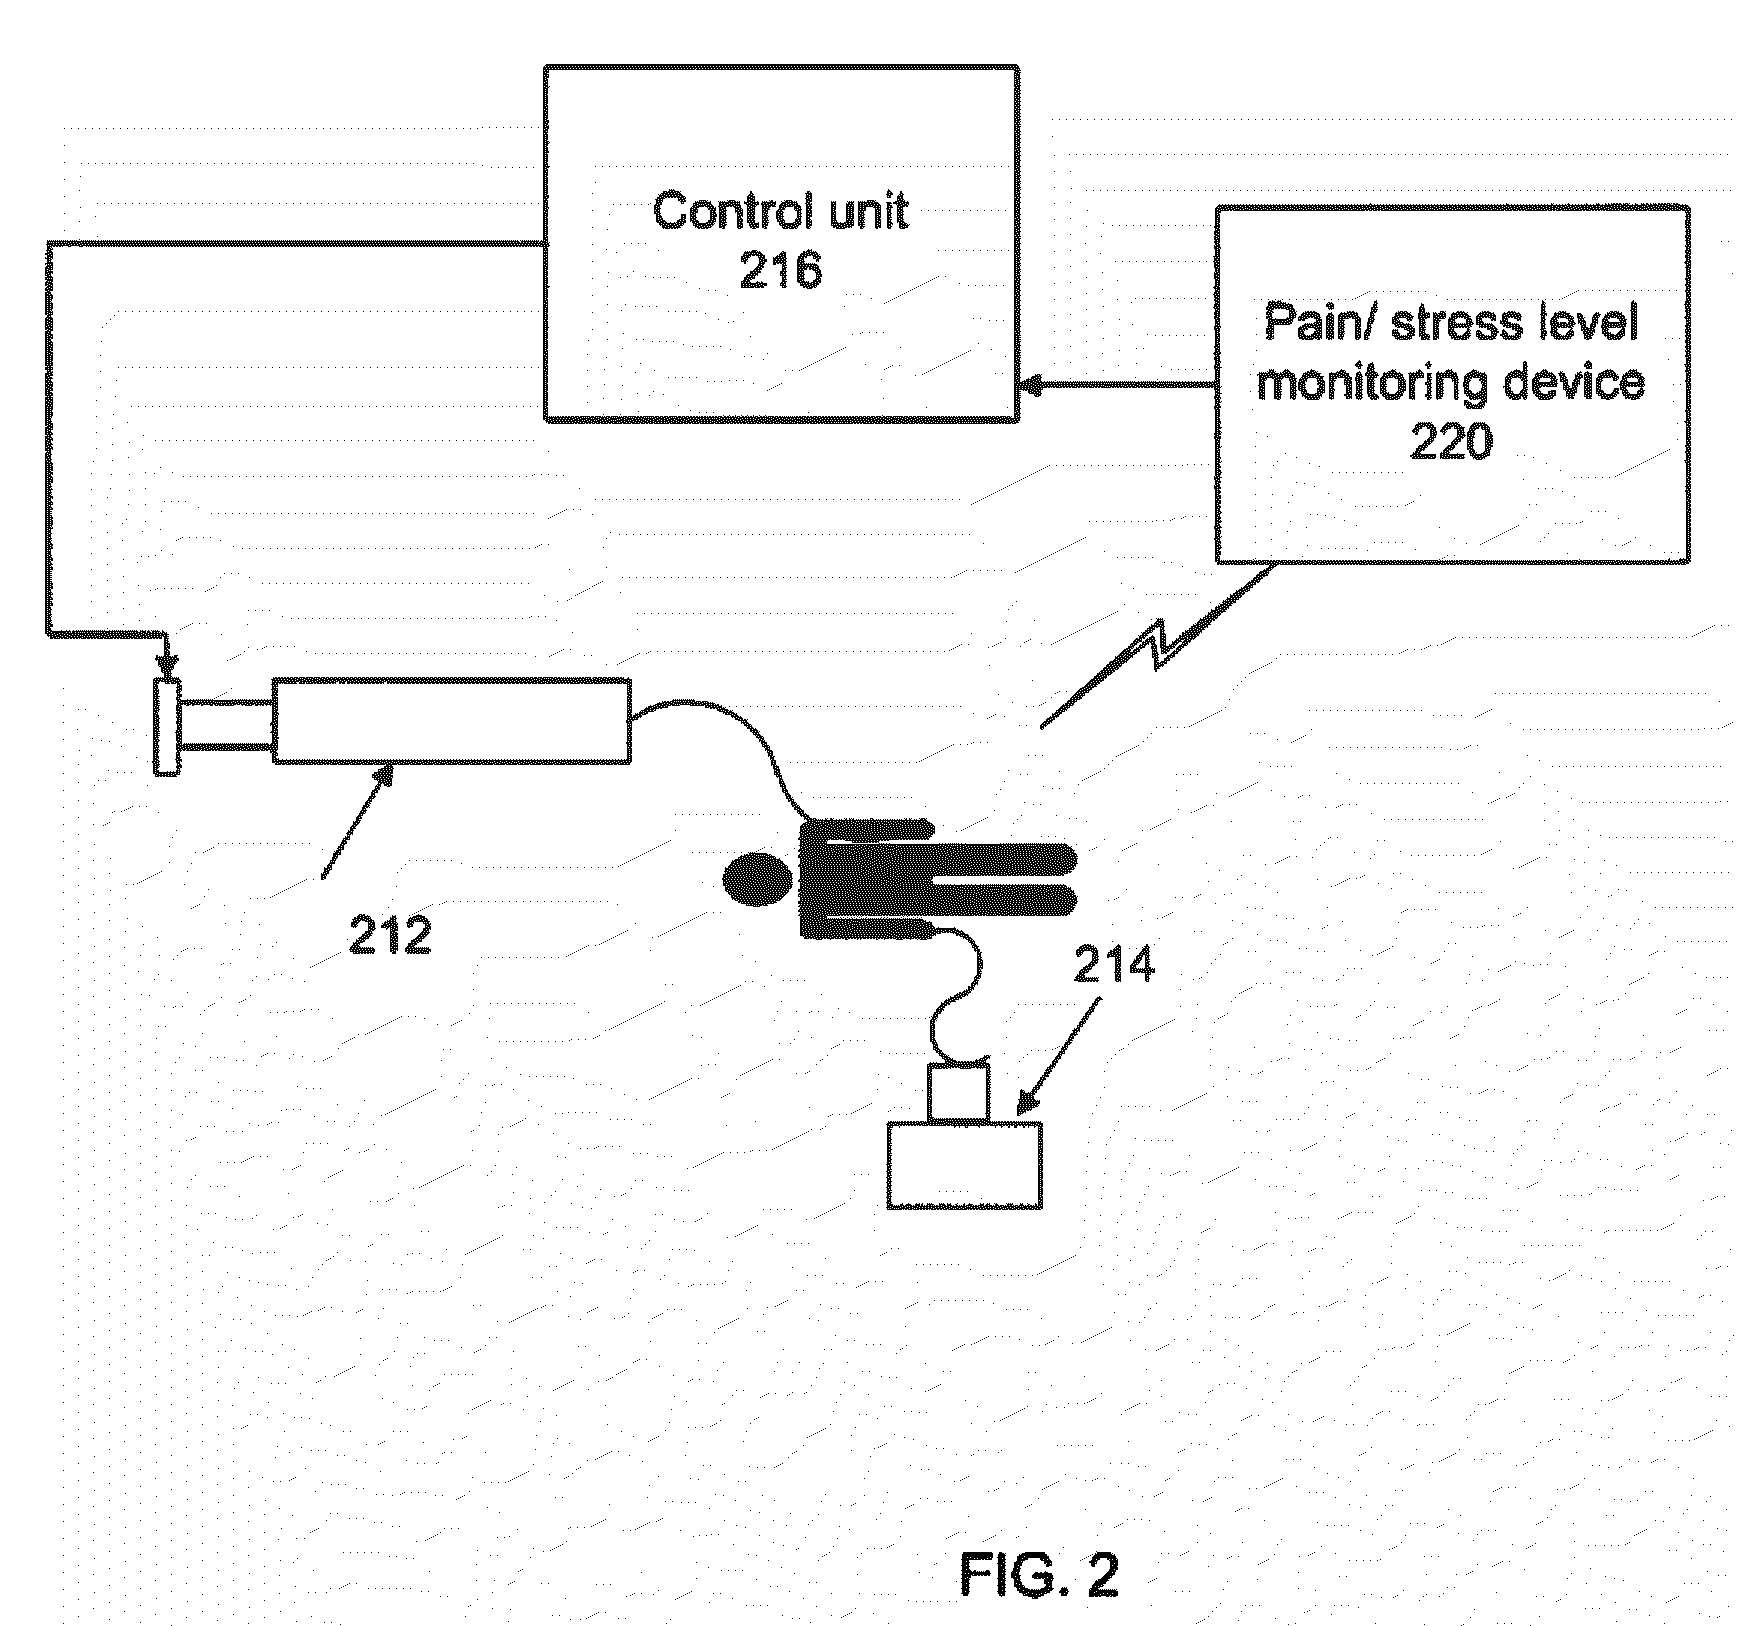 Method and system for delivering analgesic drugs